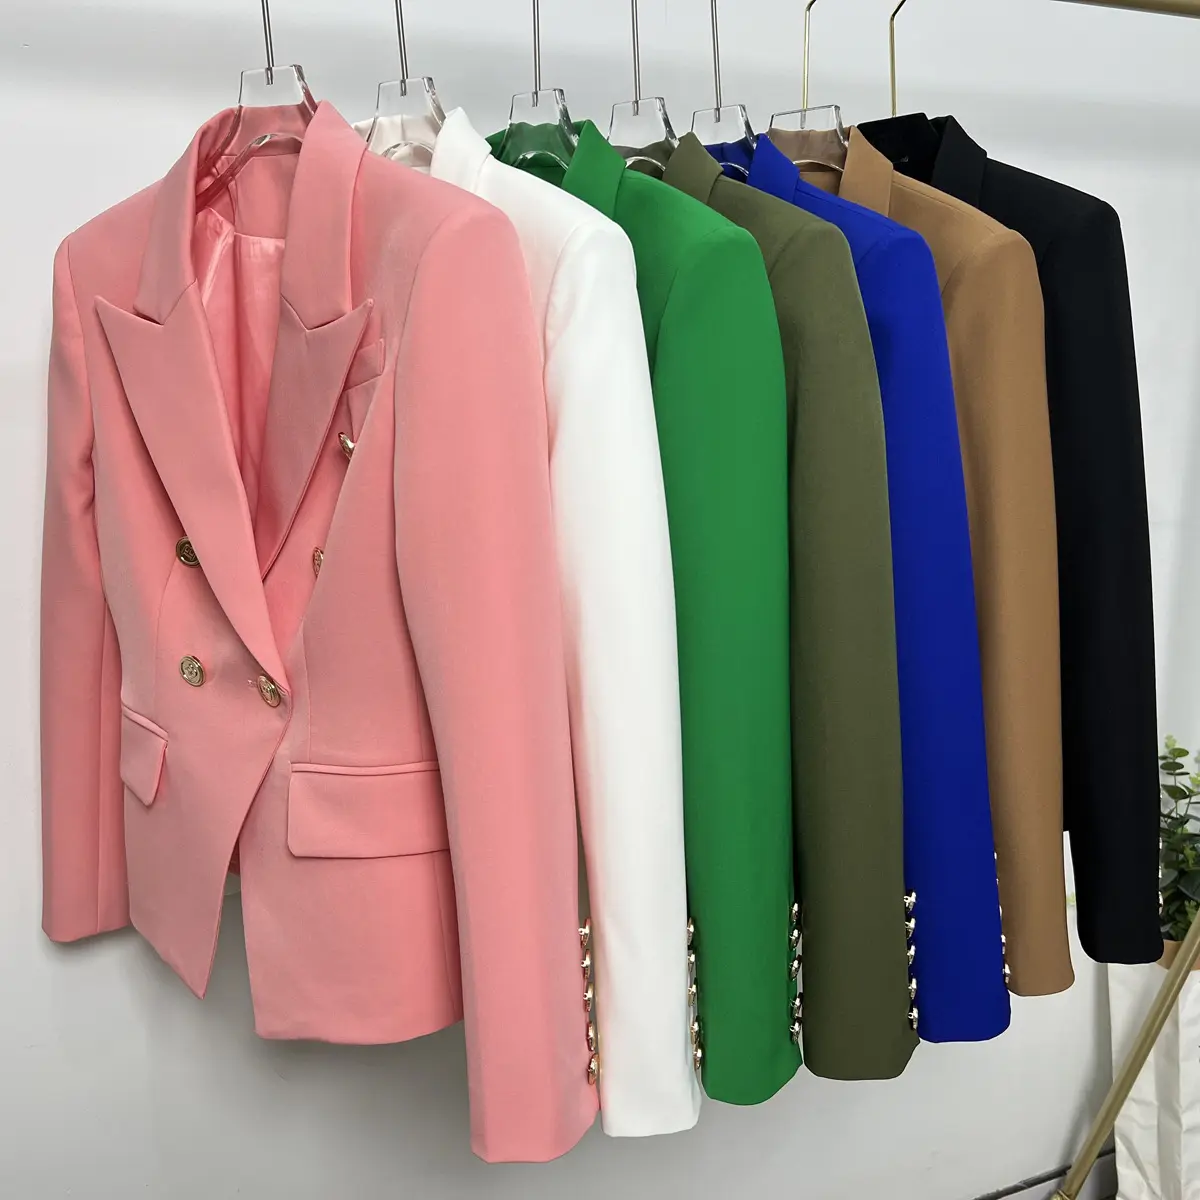 Plus Size Formal Blazers10 Colors Ready To Ship Women Clothing Vendors Manufacturers Clothes Fashion Business Blazers For Women